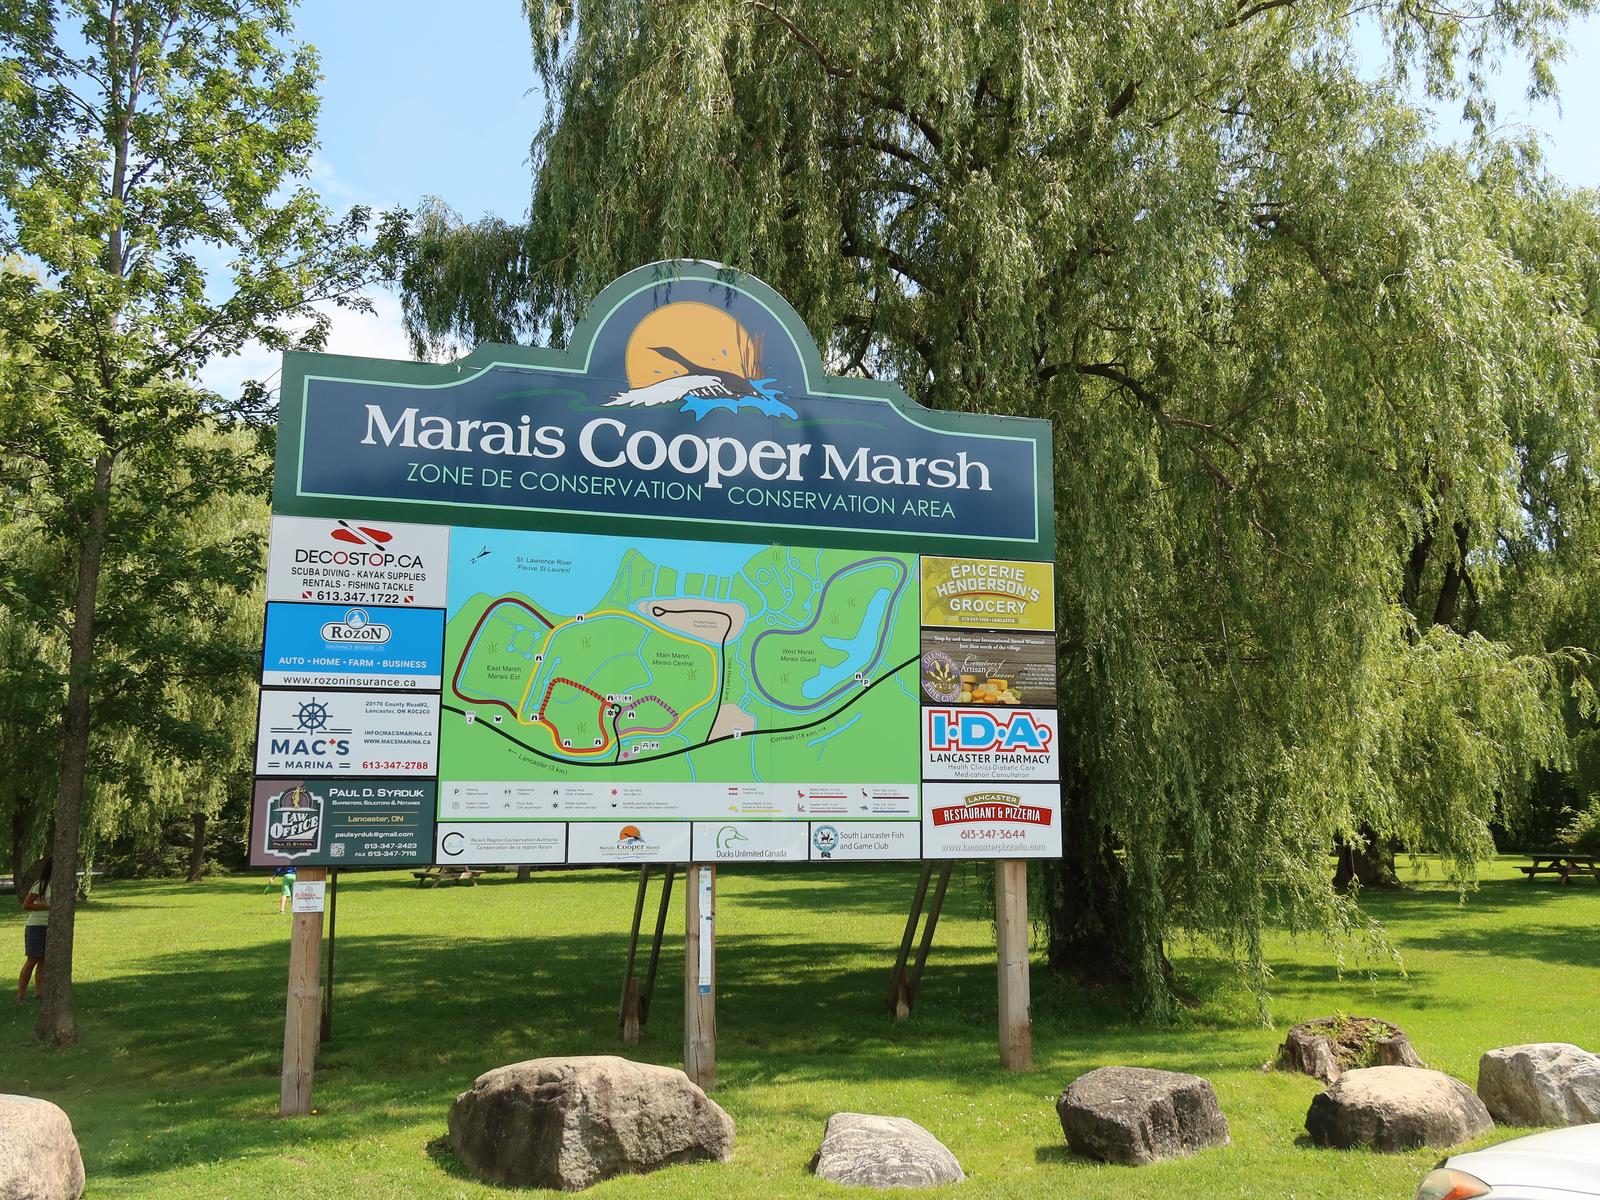 Cooper Marsh picnic area and parking lot